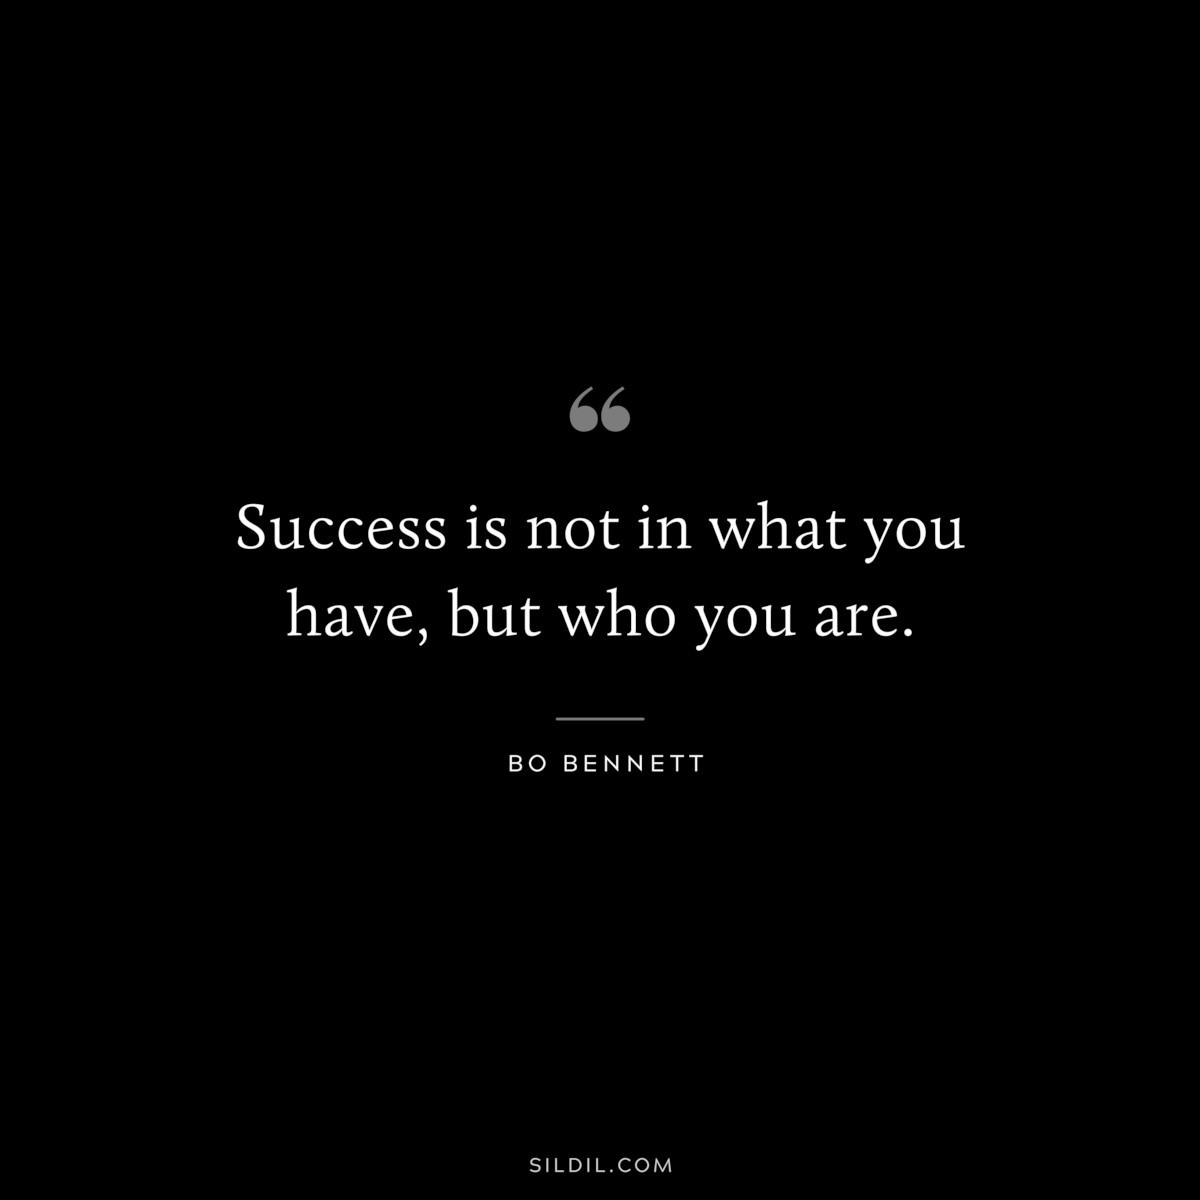 Success is not in what you have, but who you are. ― Bo Bennett